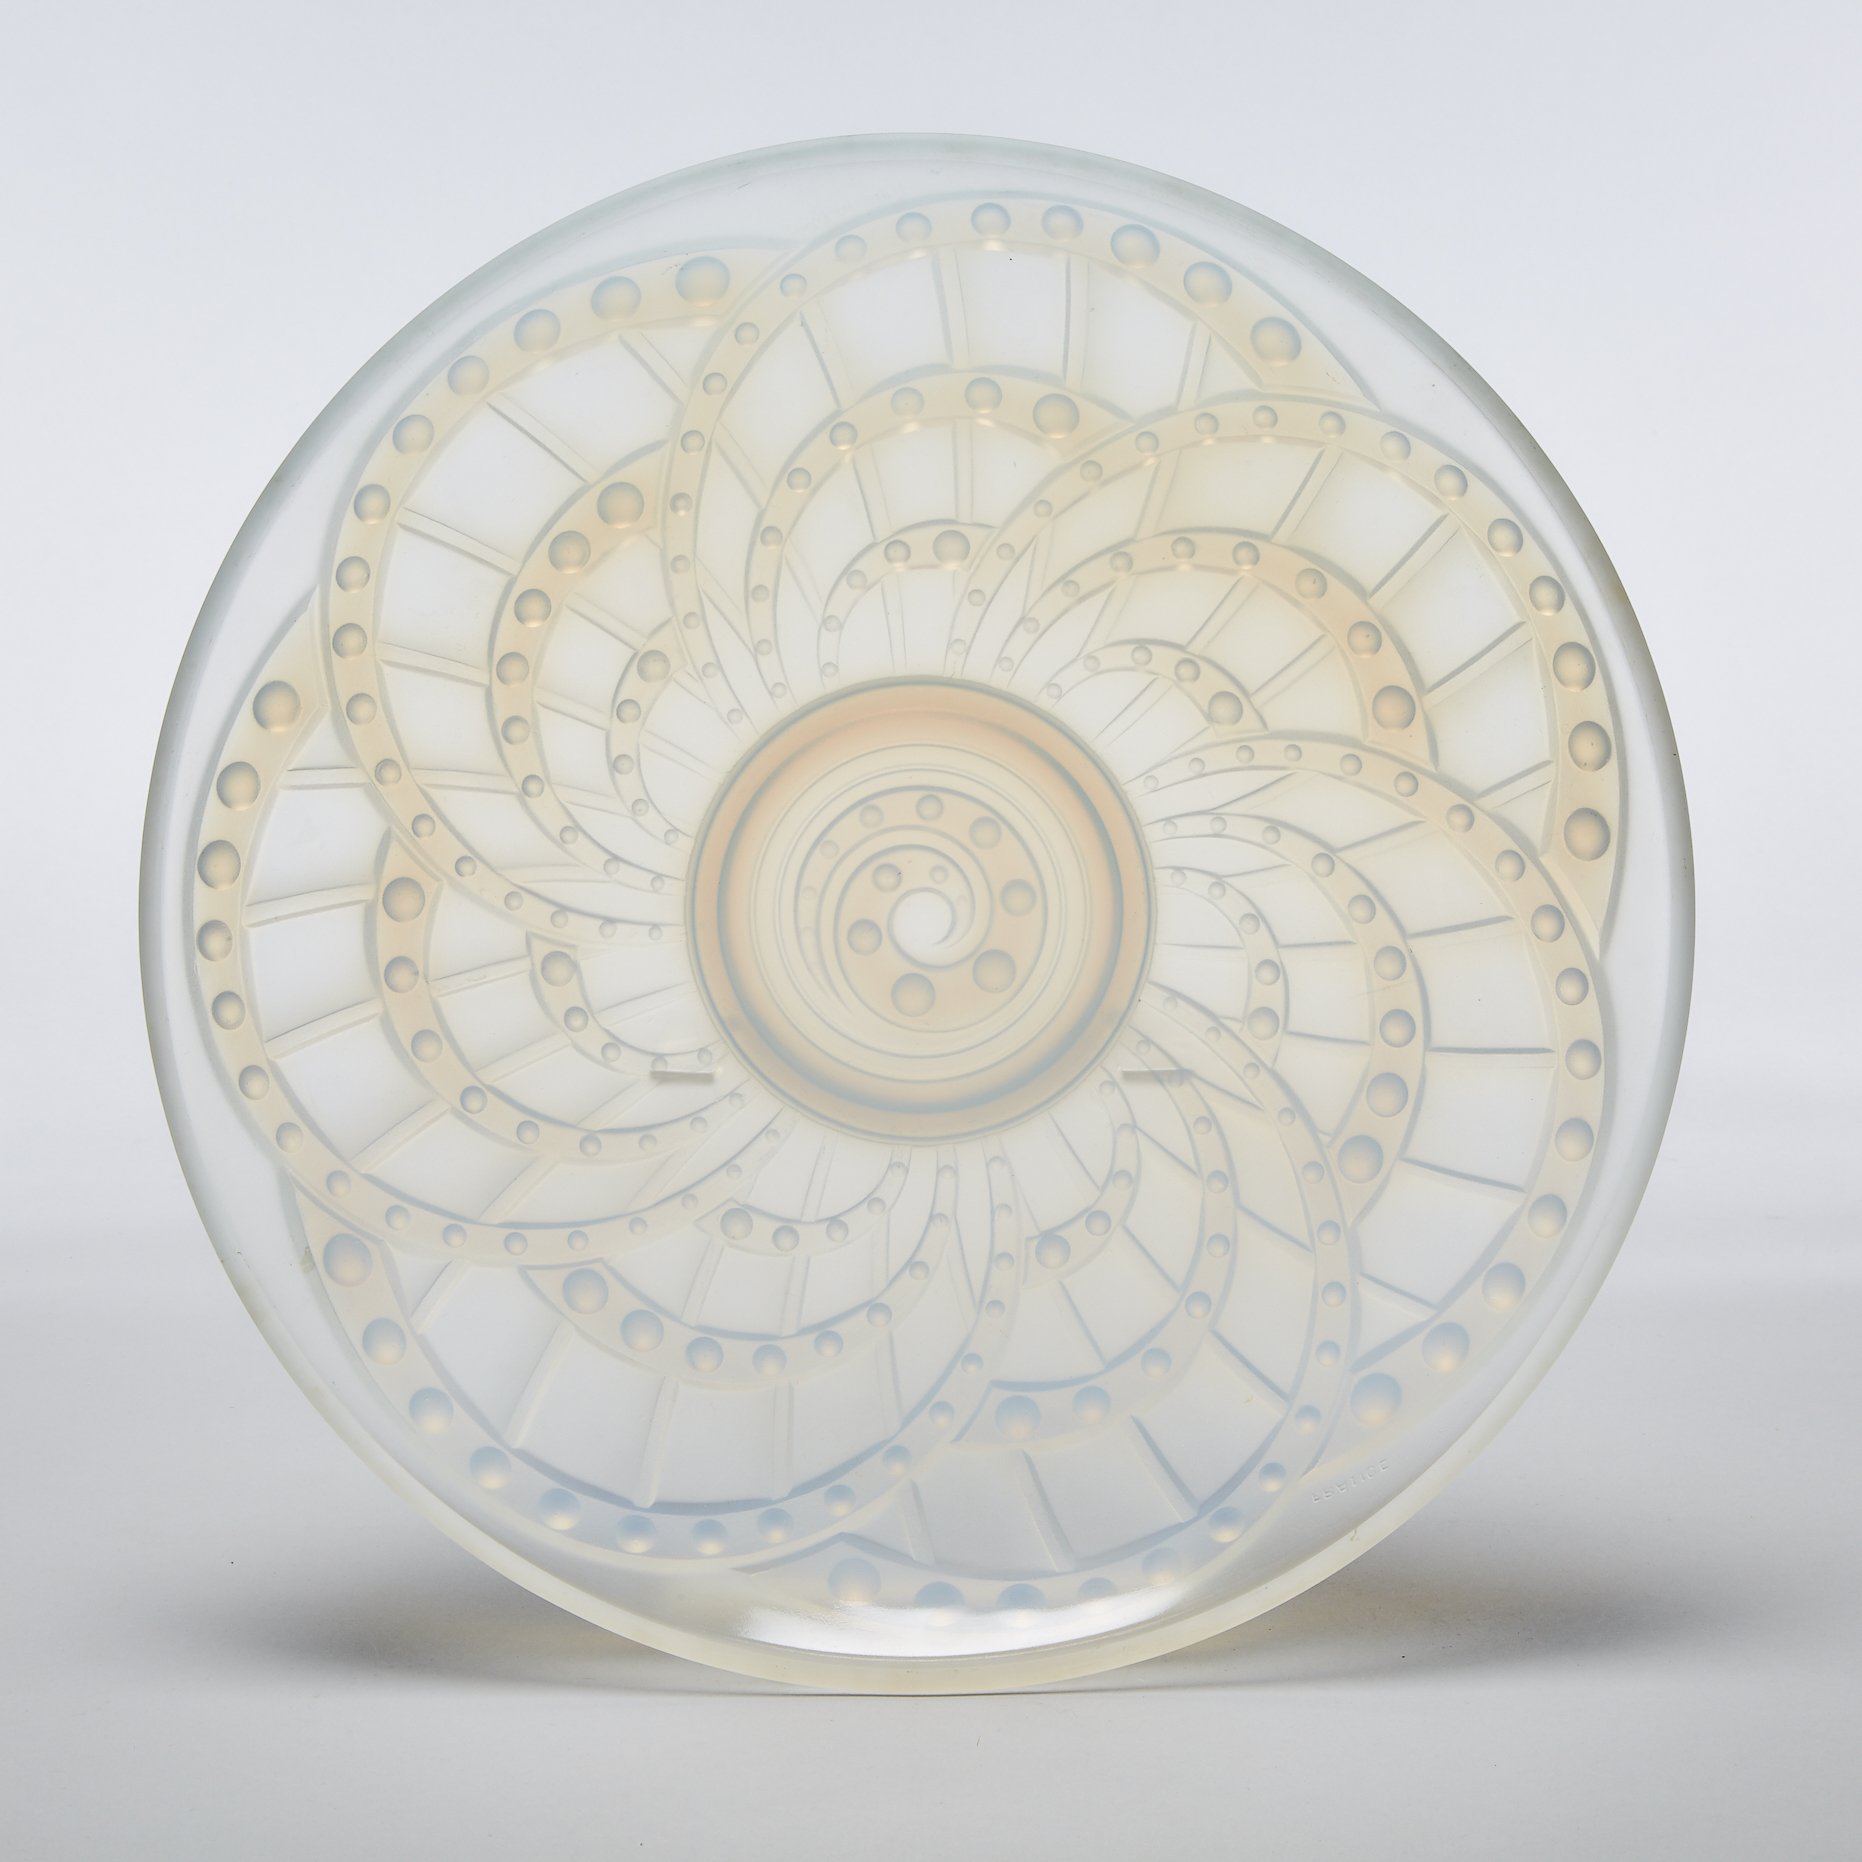 Landier Moulded Opalescent Glass Charger, 1930s